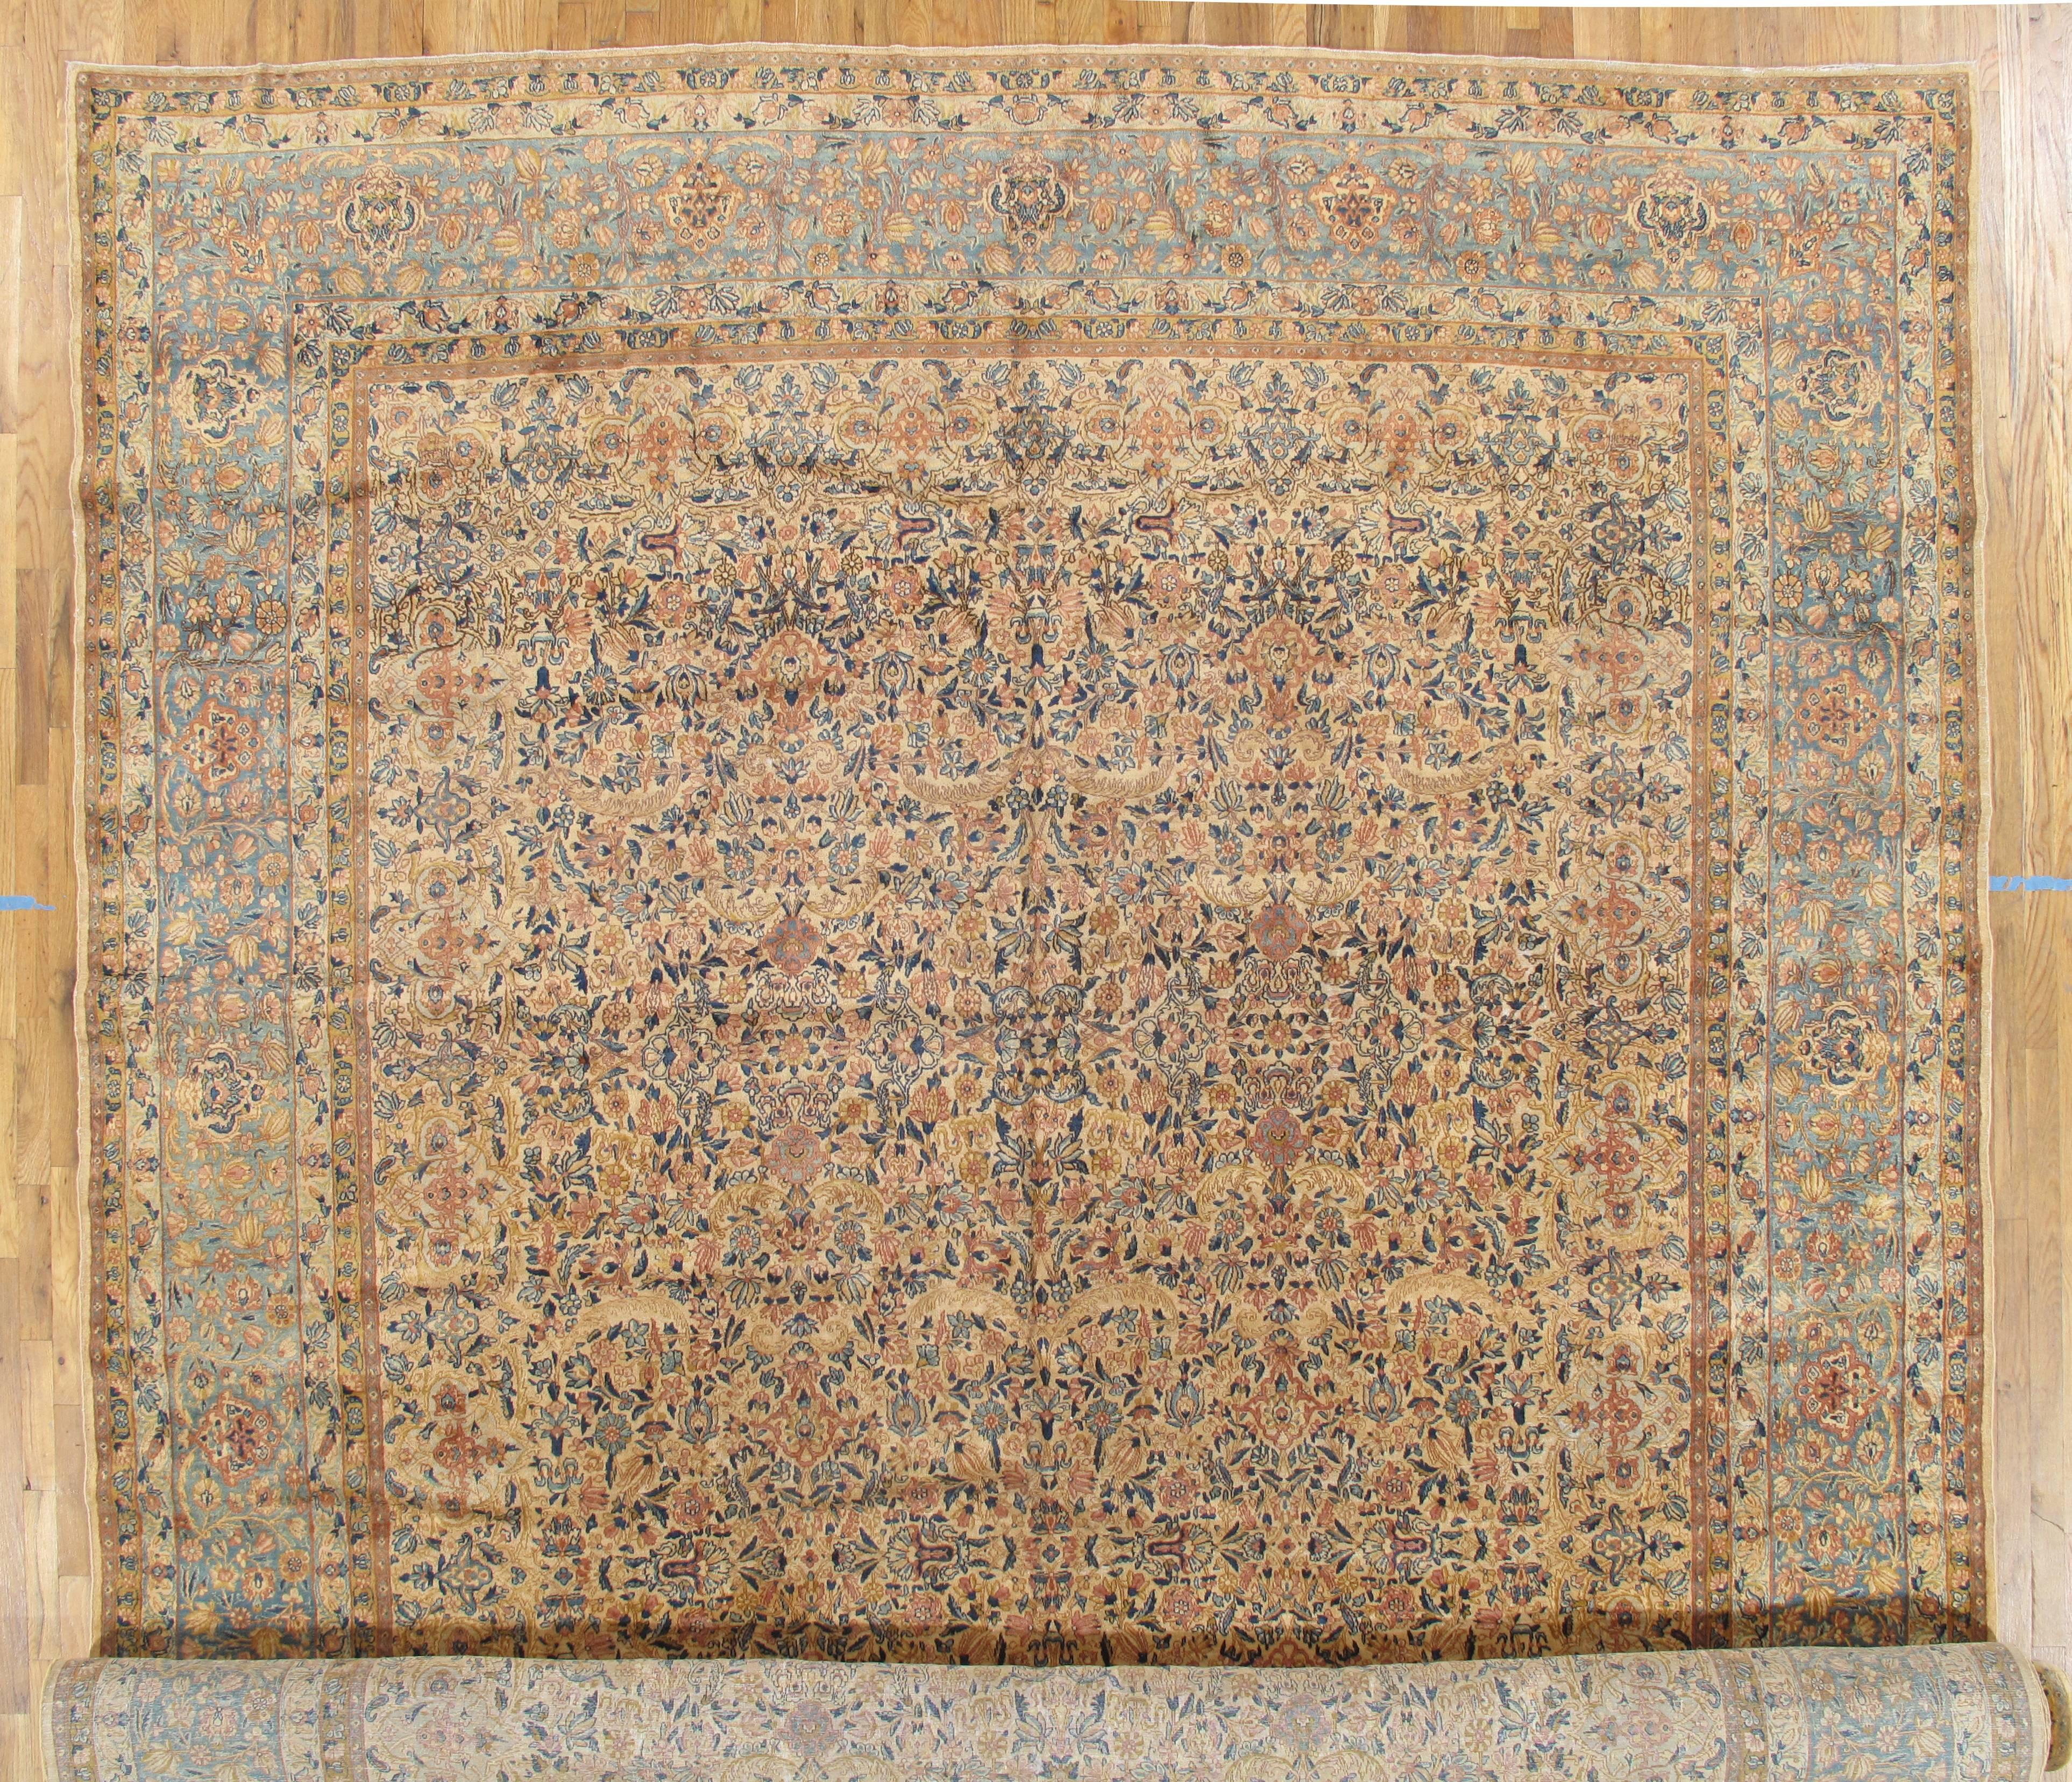 Hand-Knotted Antique Kerman Carpet, Handmade Persian Rug Wool Carpet, Blue, Beige and Peach For Sale